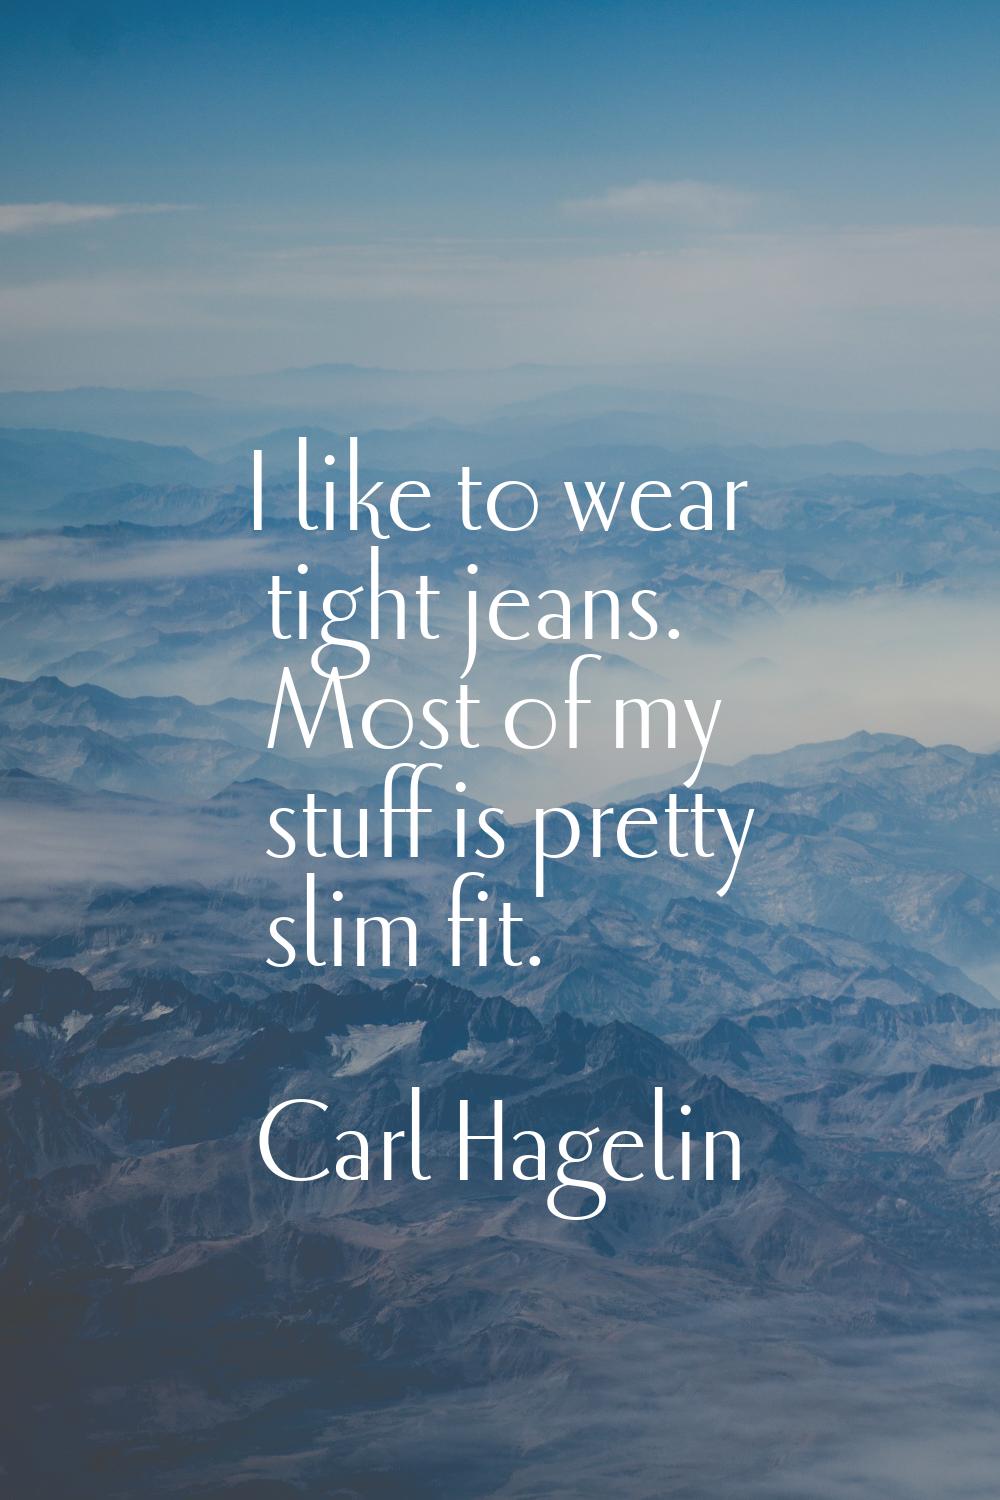 I like to wear tight jeans. Most of my stuff is pretty slim fit.